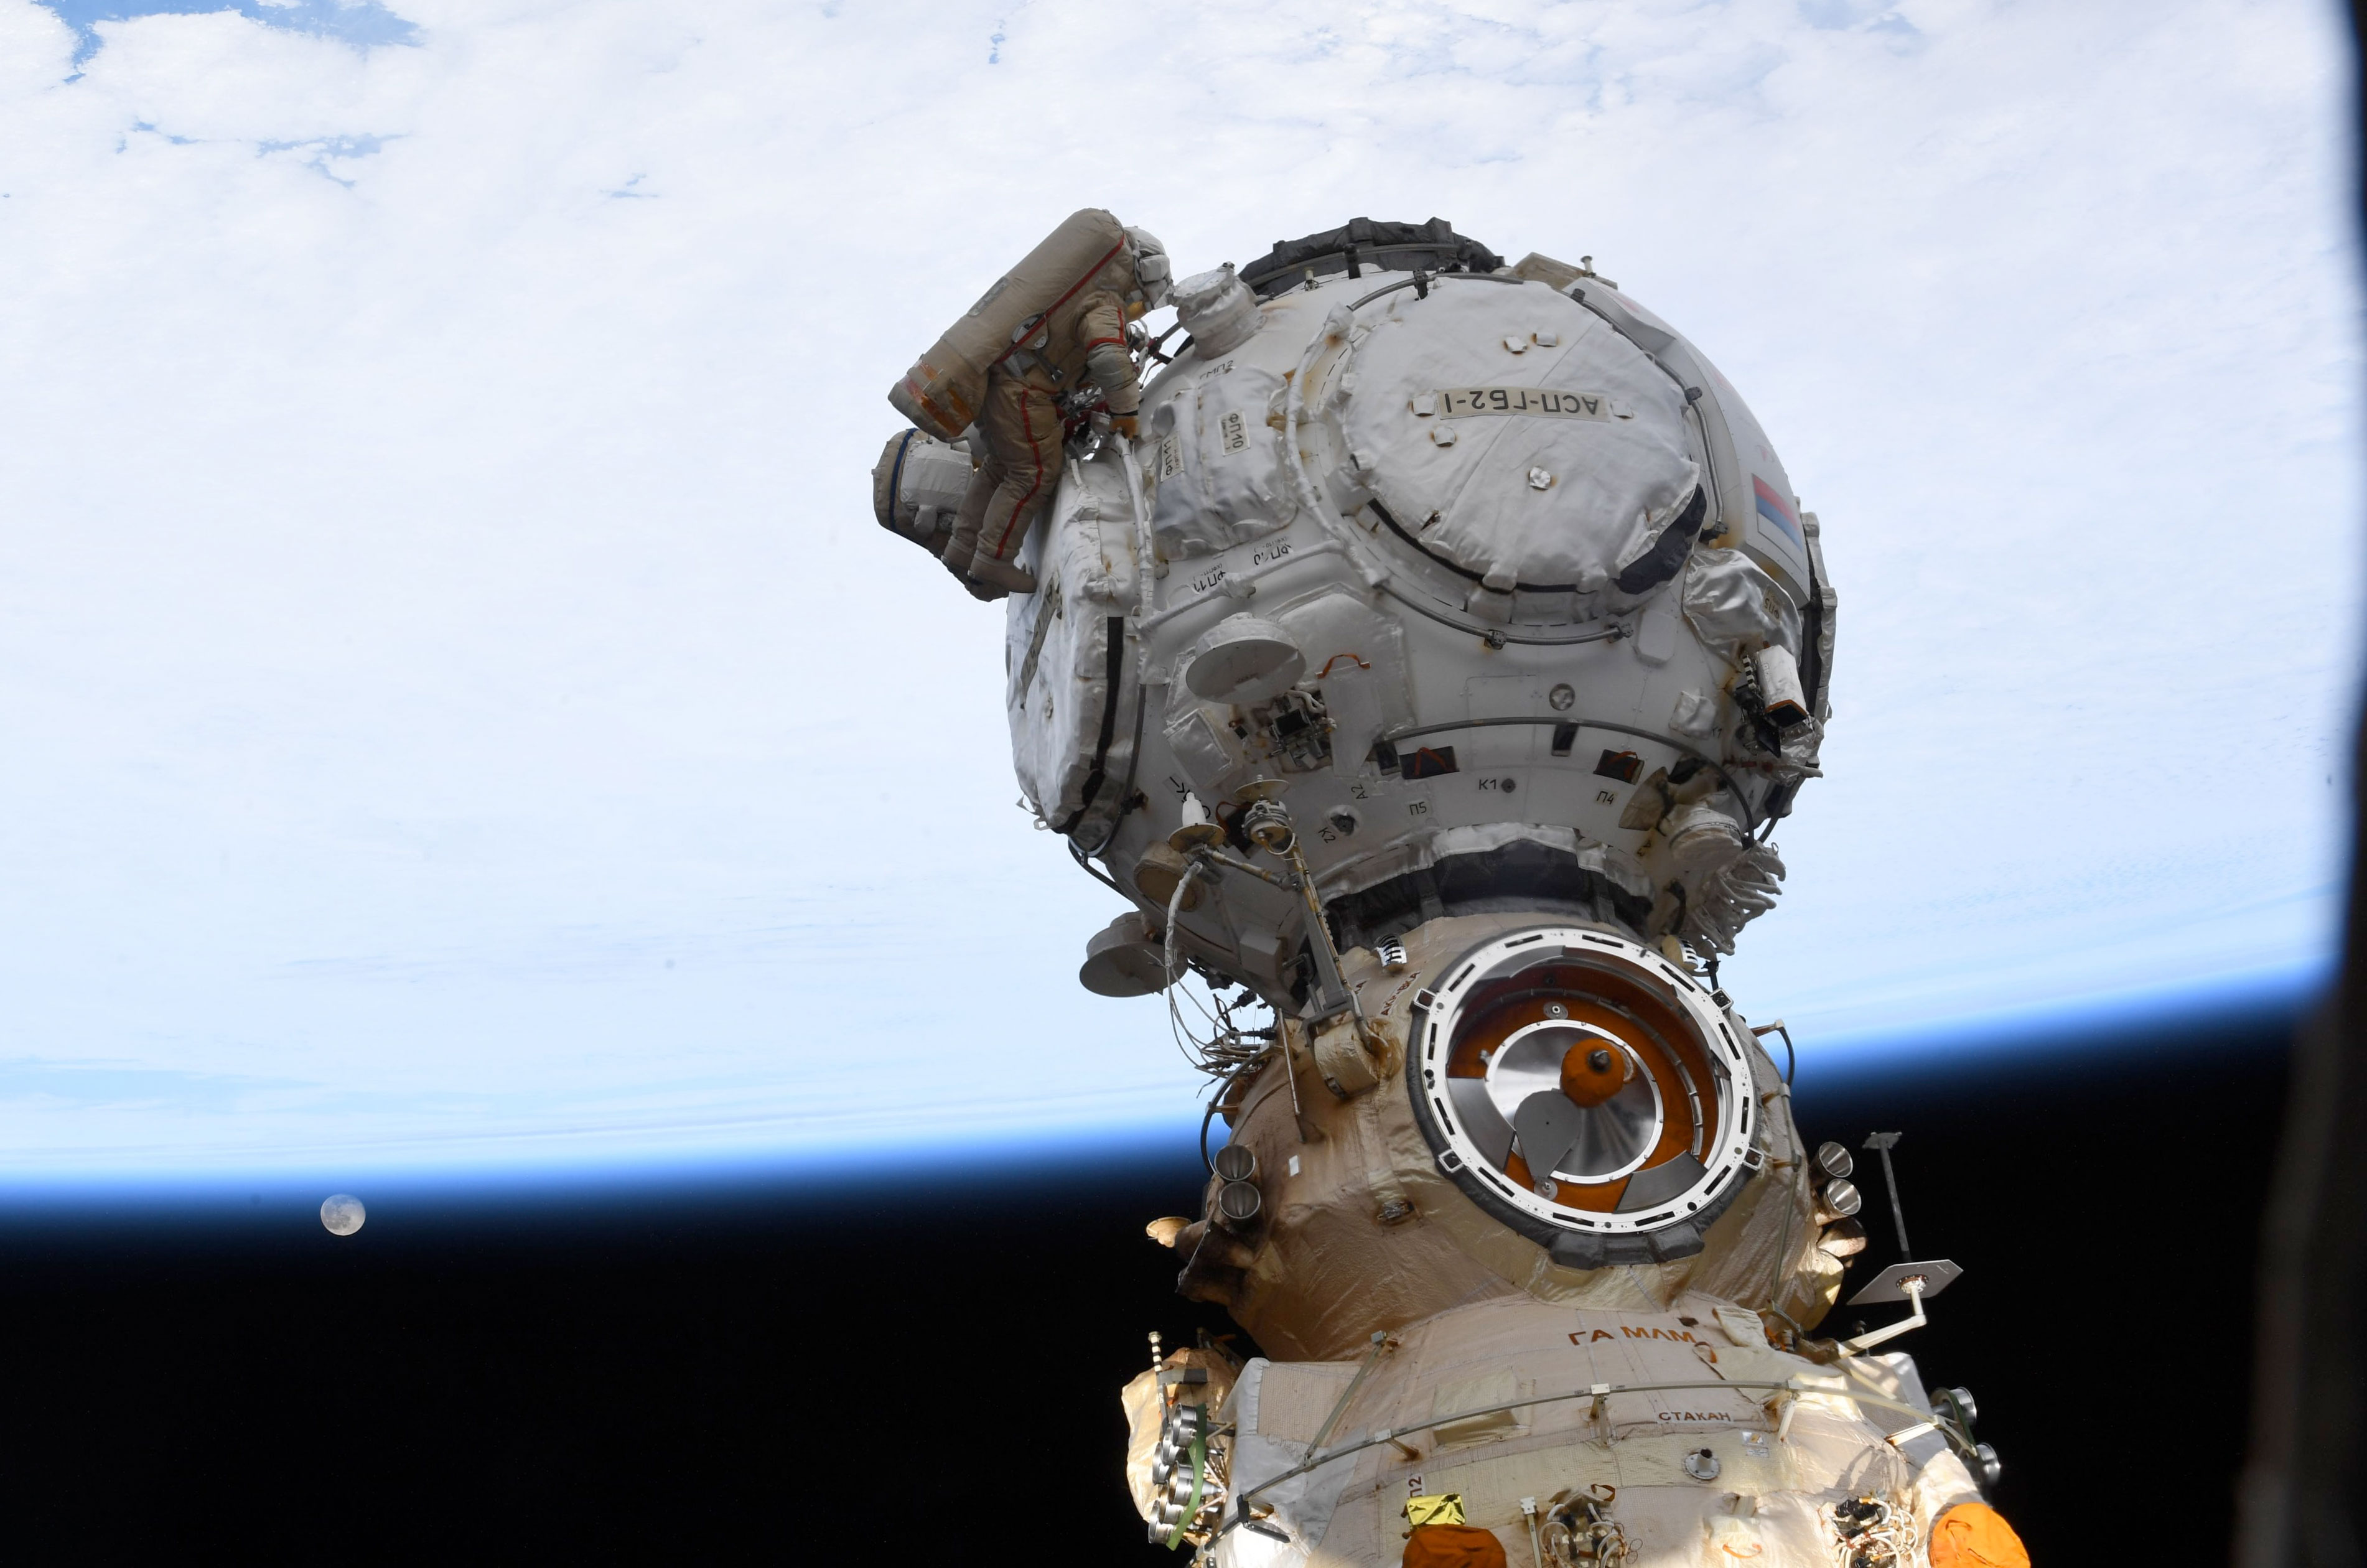 Cosmonauts on spacewalk ready new Russian docking port for future space station arrivals thumbnail